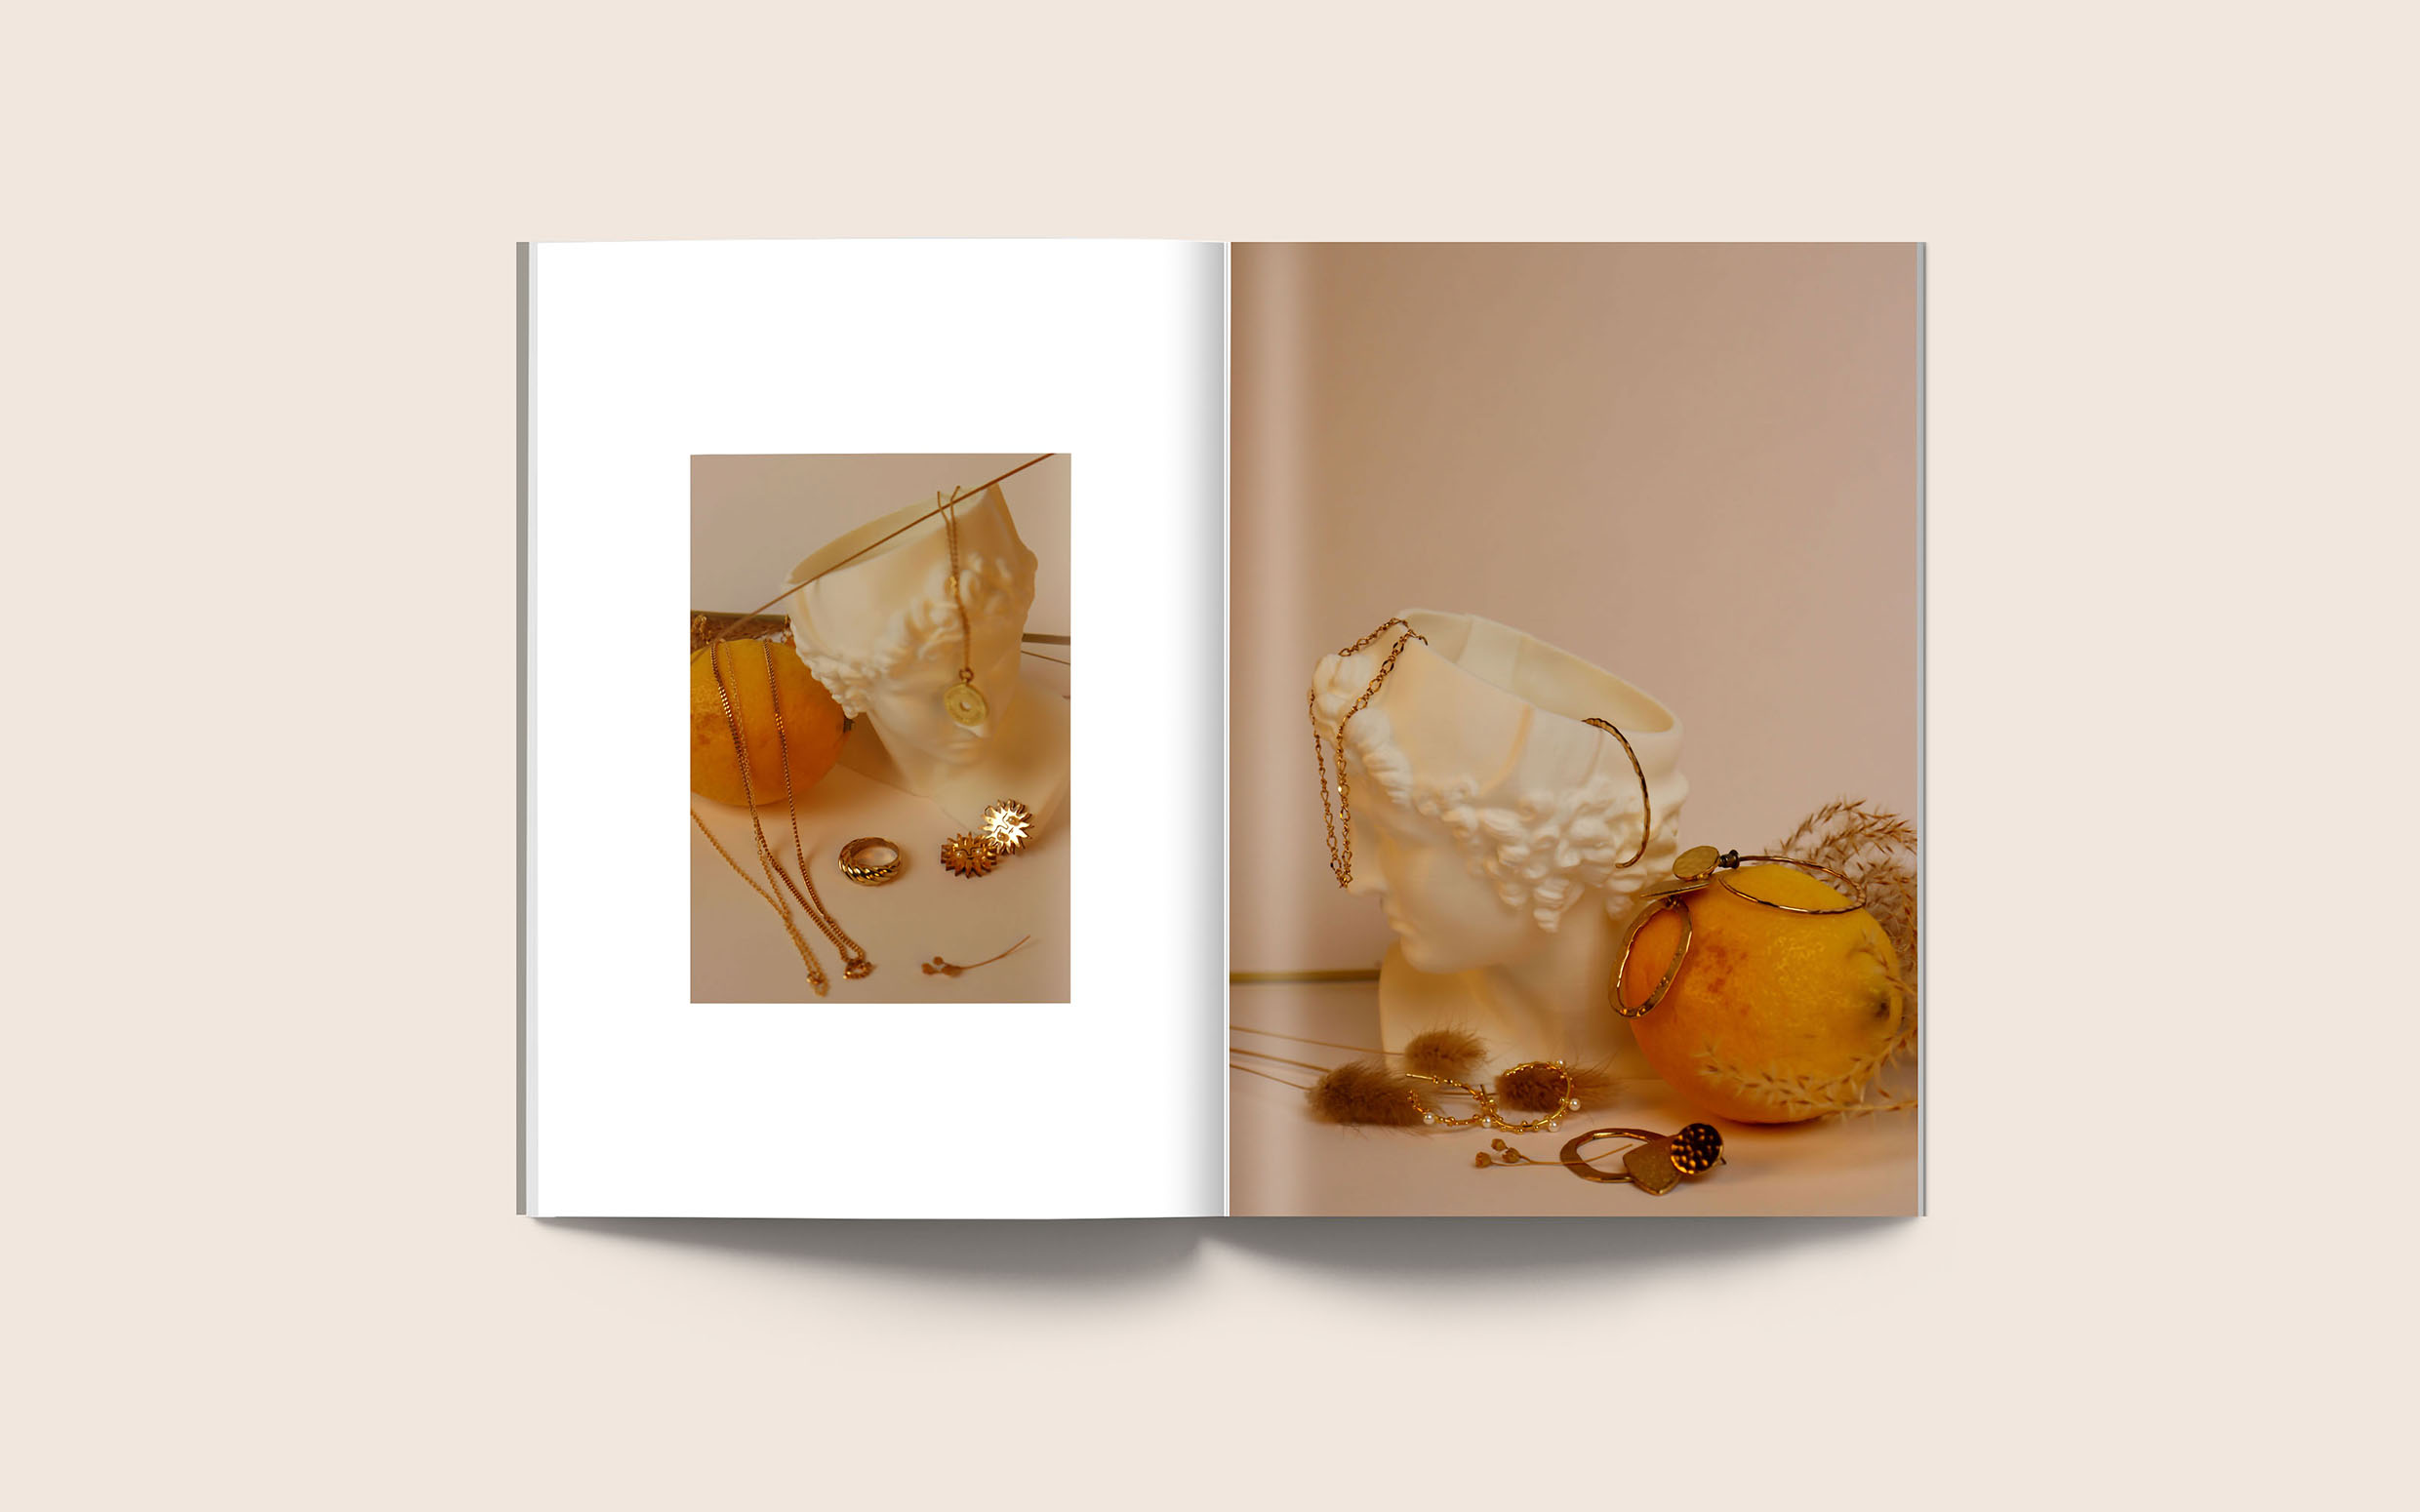 Coffee-table book mock-up by Katie Thompson showing editorial still-life jewellery imagery.